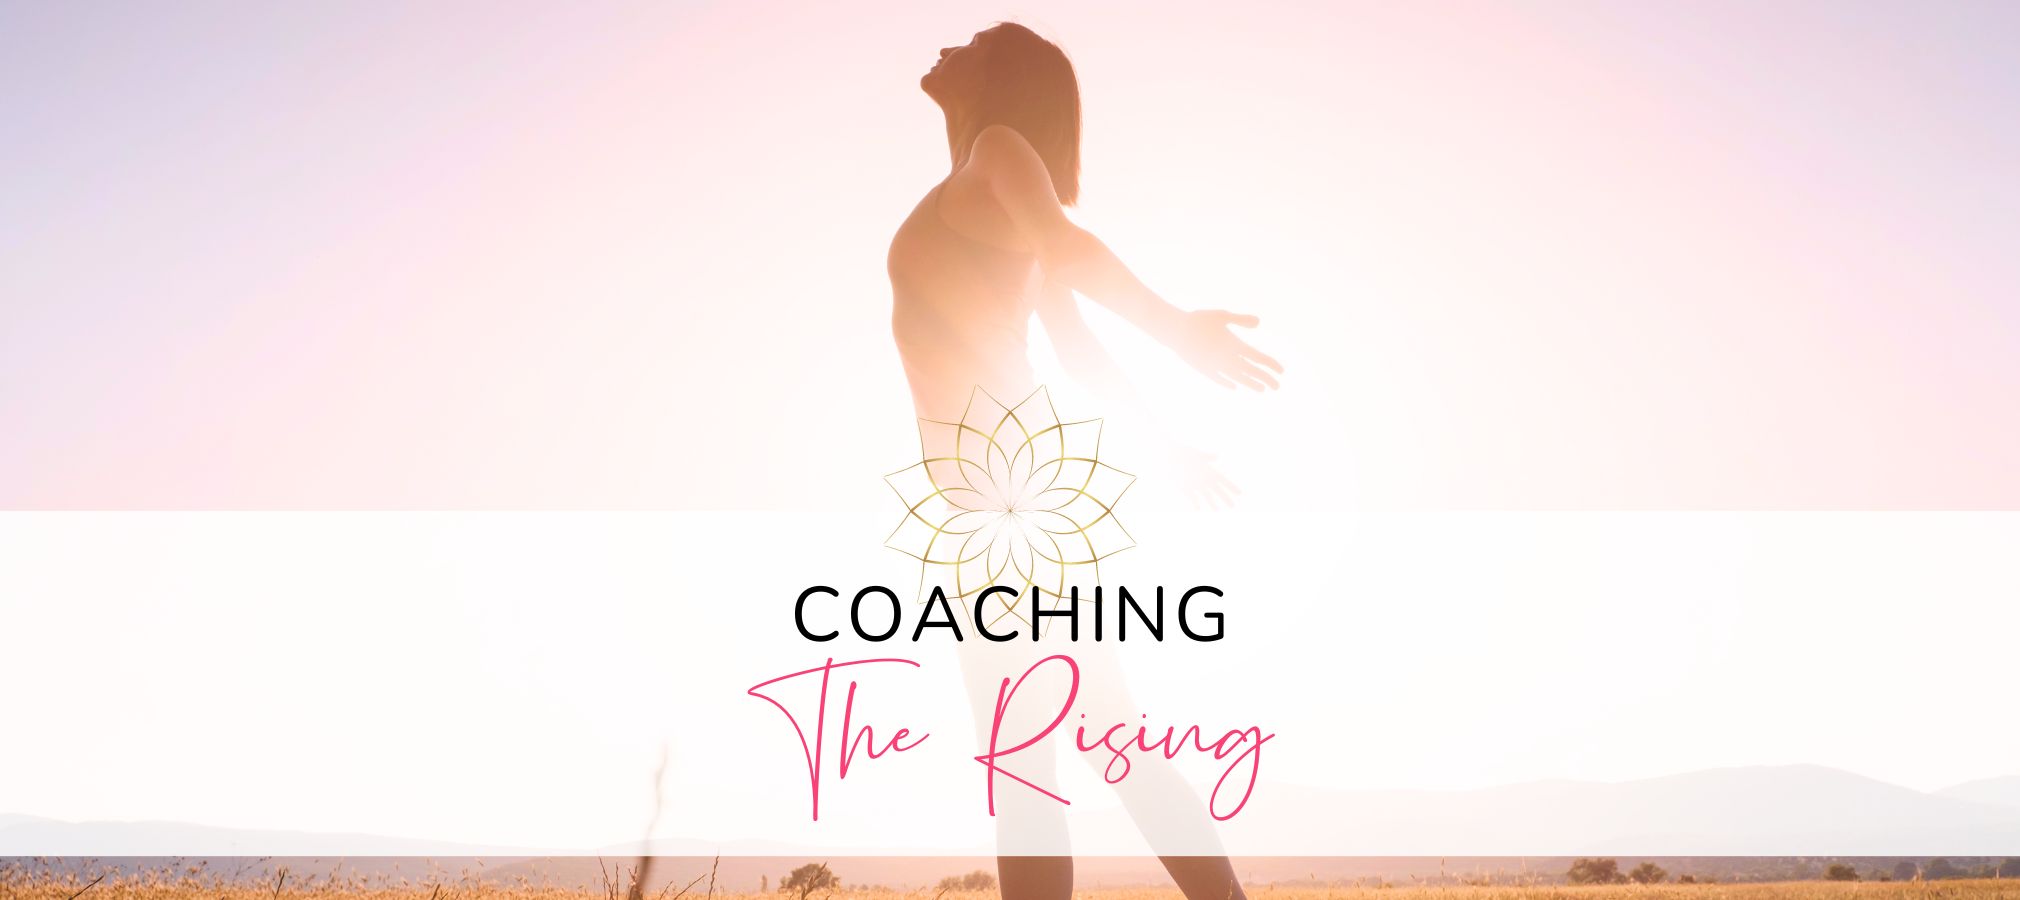 “The Rising” Coaching by Stephanie Benz